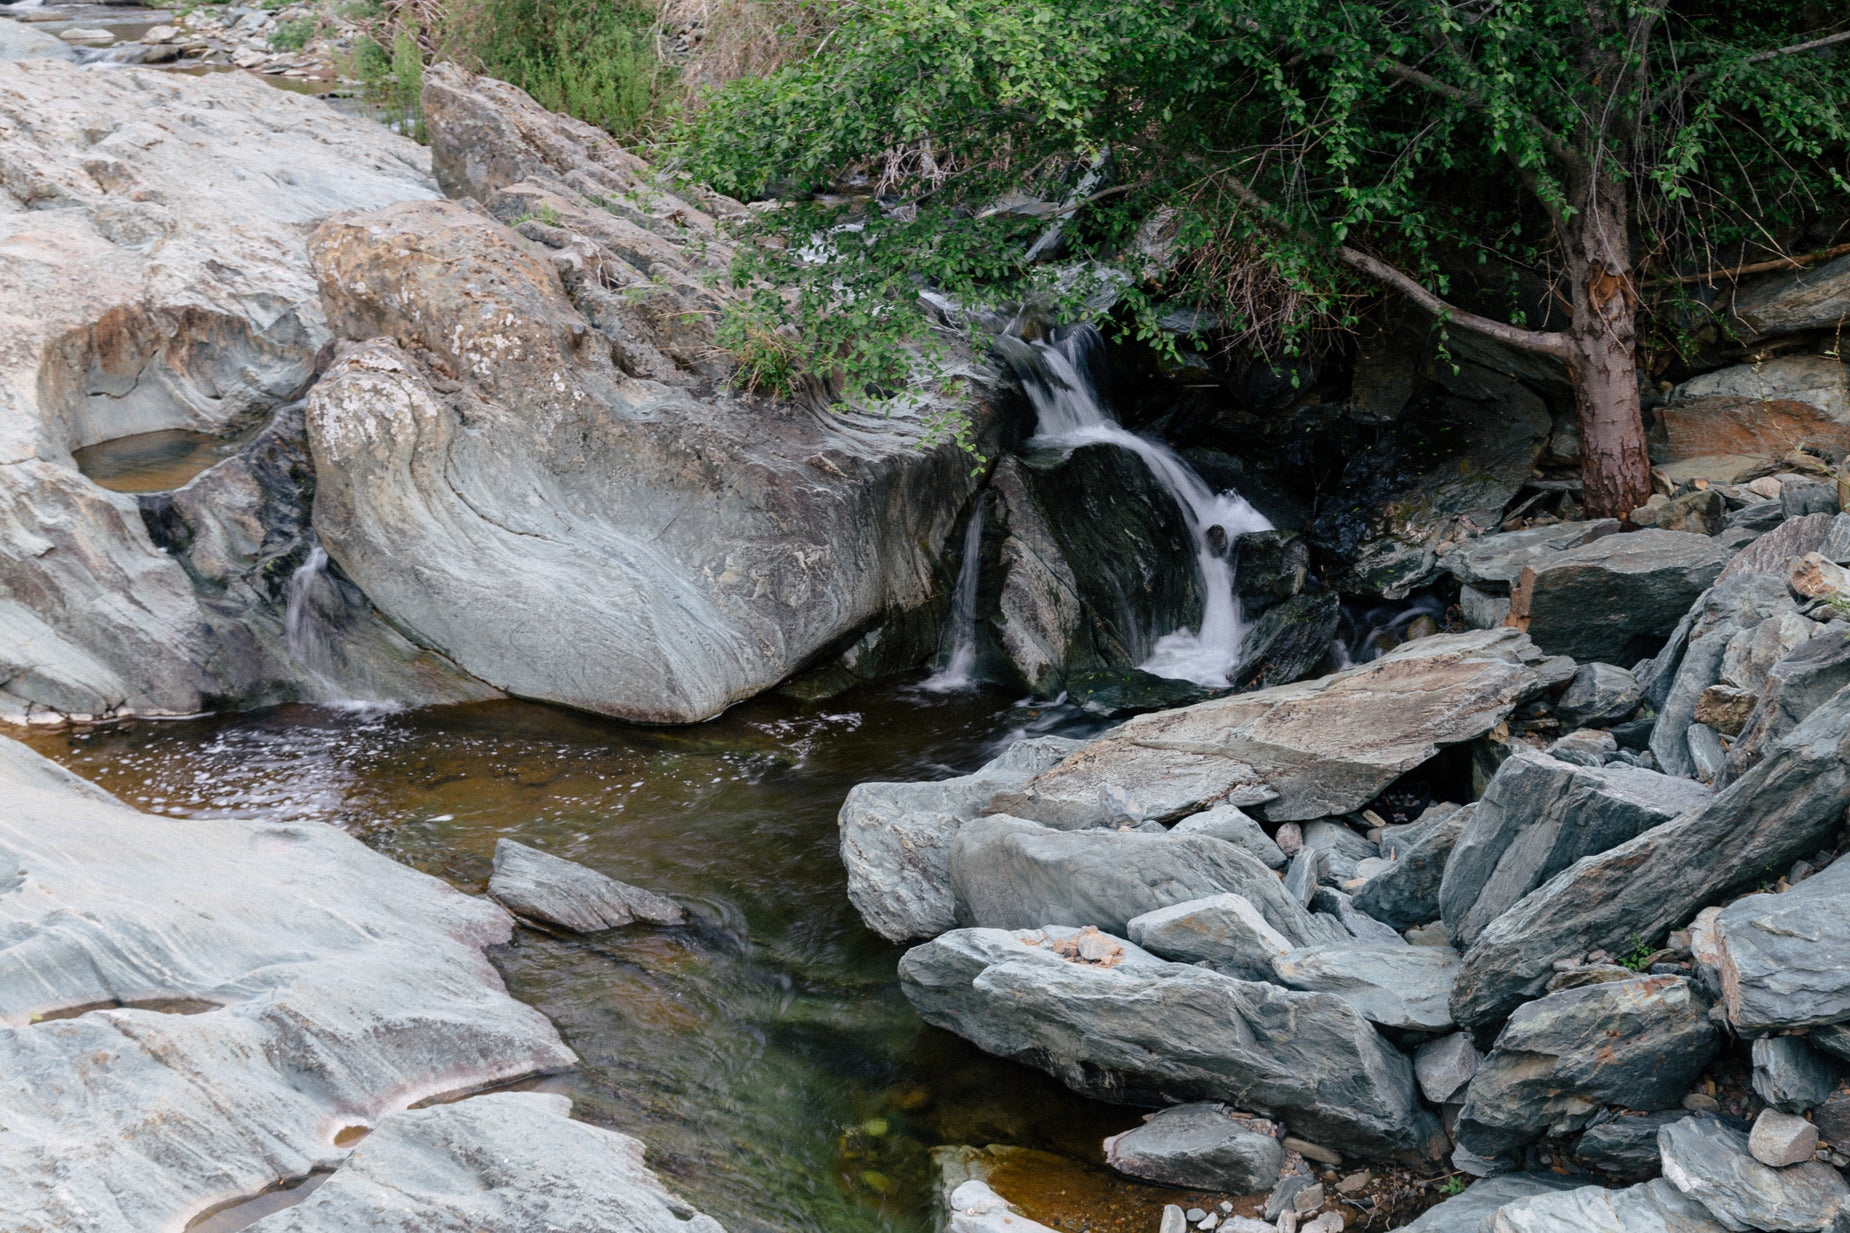 a stream flowing from a rocky river bed with lots of boulders